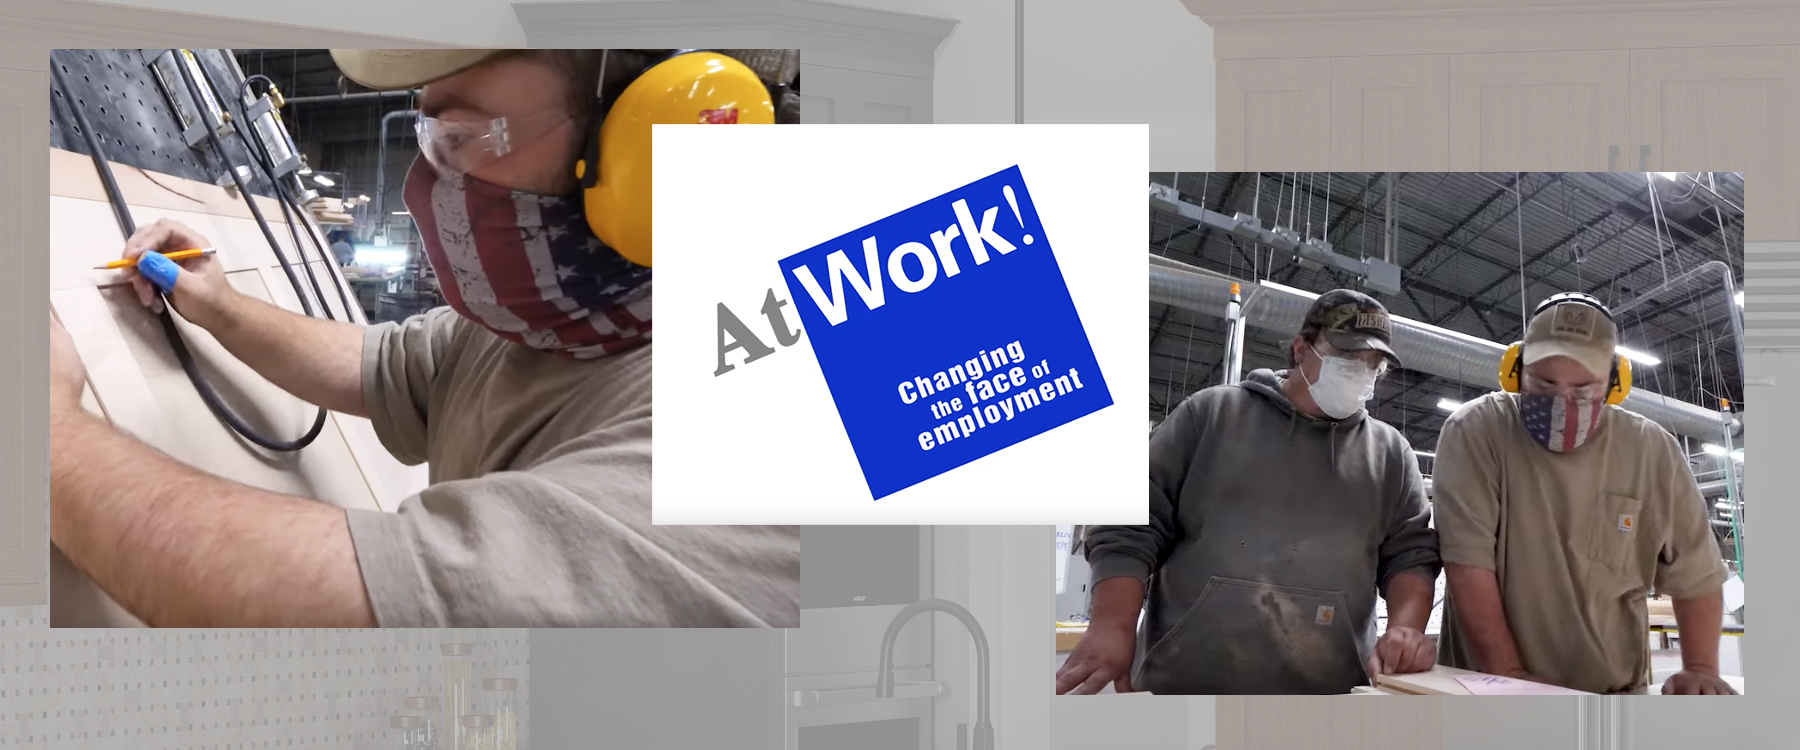 Two Images of Canyon Creek Employees Working with Text Overlay, "At Work! Changing the Face of Employment" | Canyon Creek Cabinet Company